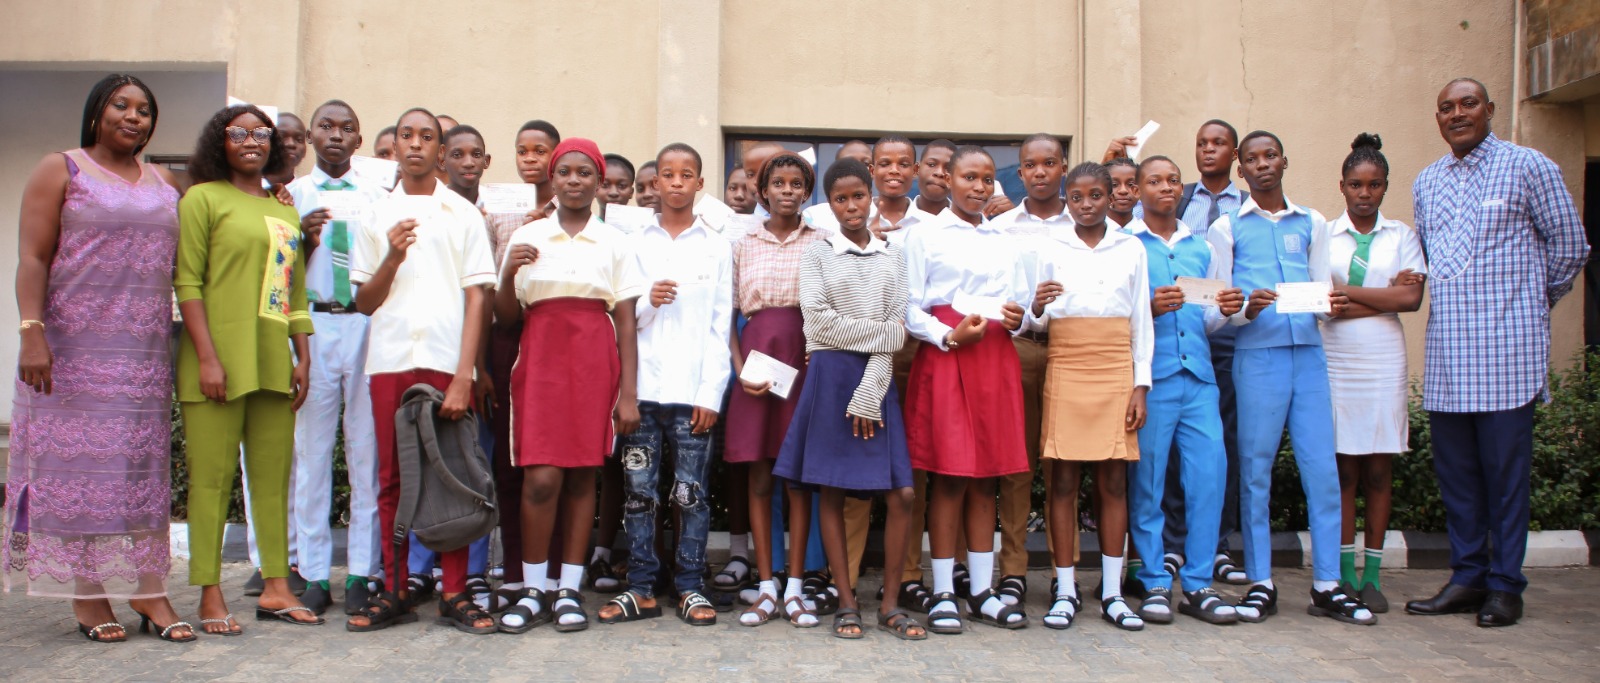 SeedOfVictory Doubled WAEC Support Project in Yenagoa